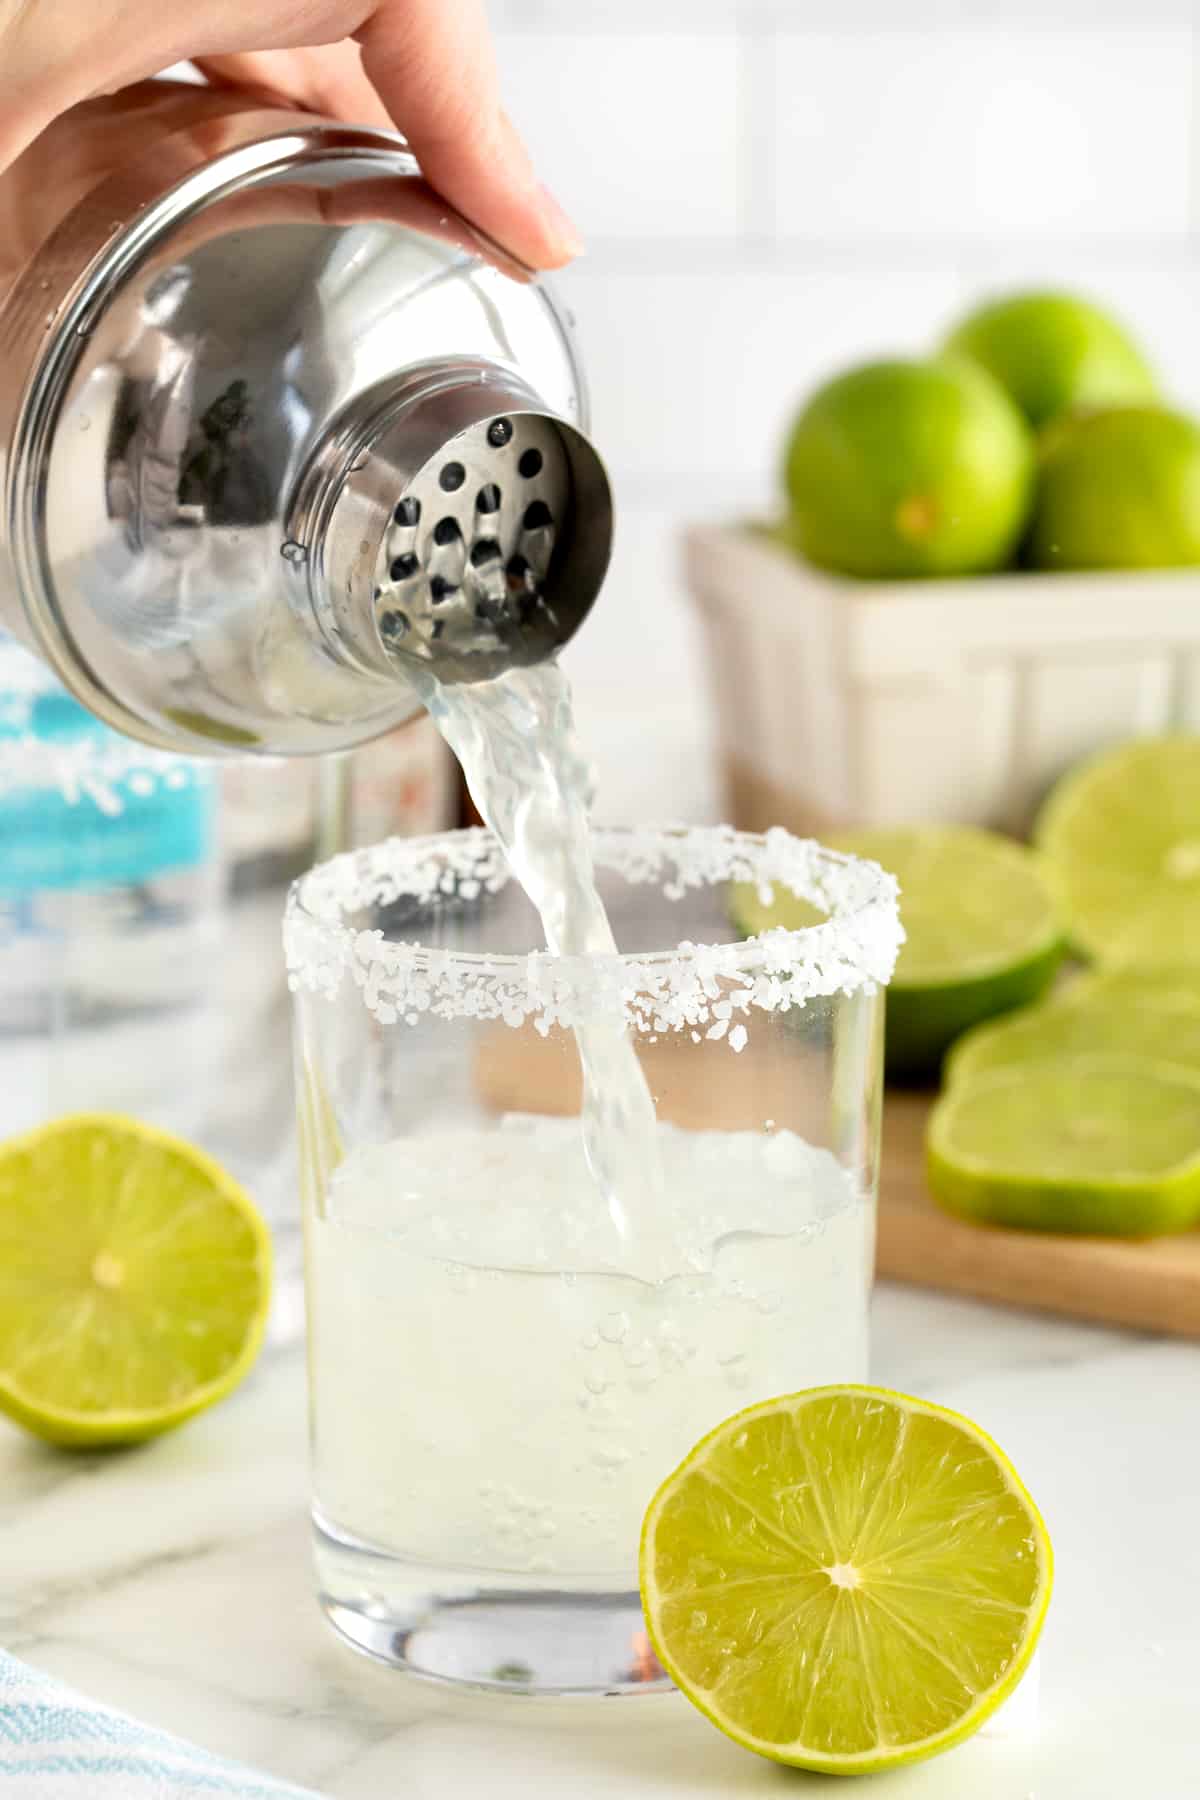 A salt rimmed glass being filled with margarita on a rimmed wooden serving tray. There is a lime wedge on the rim of the glass.